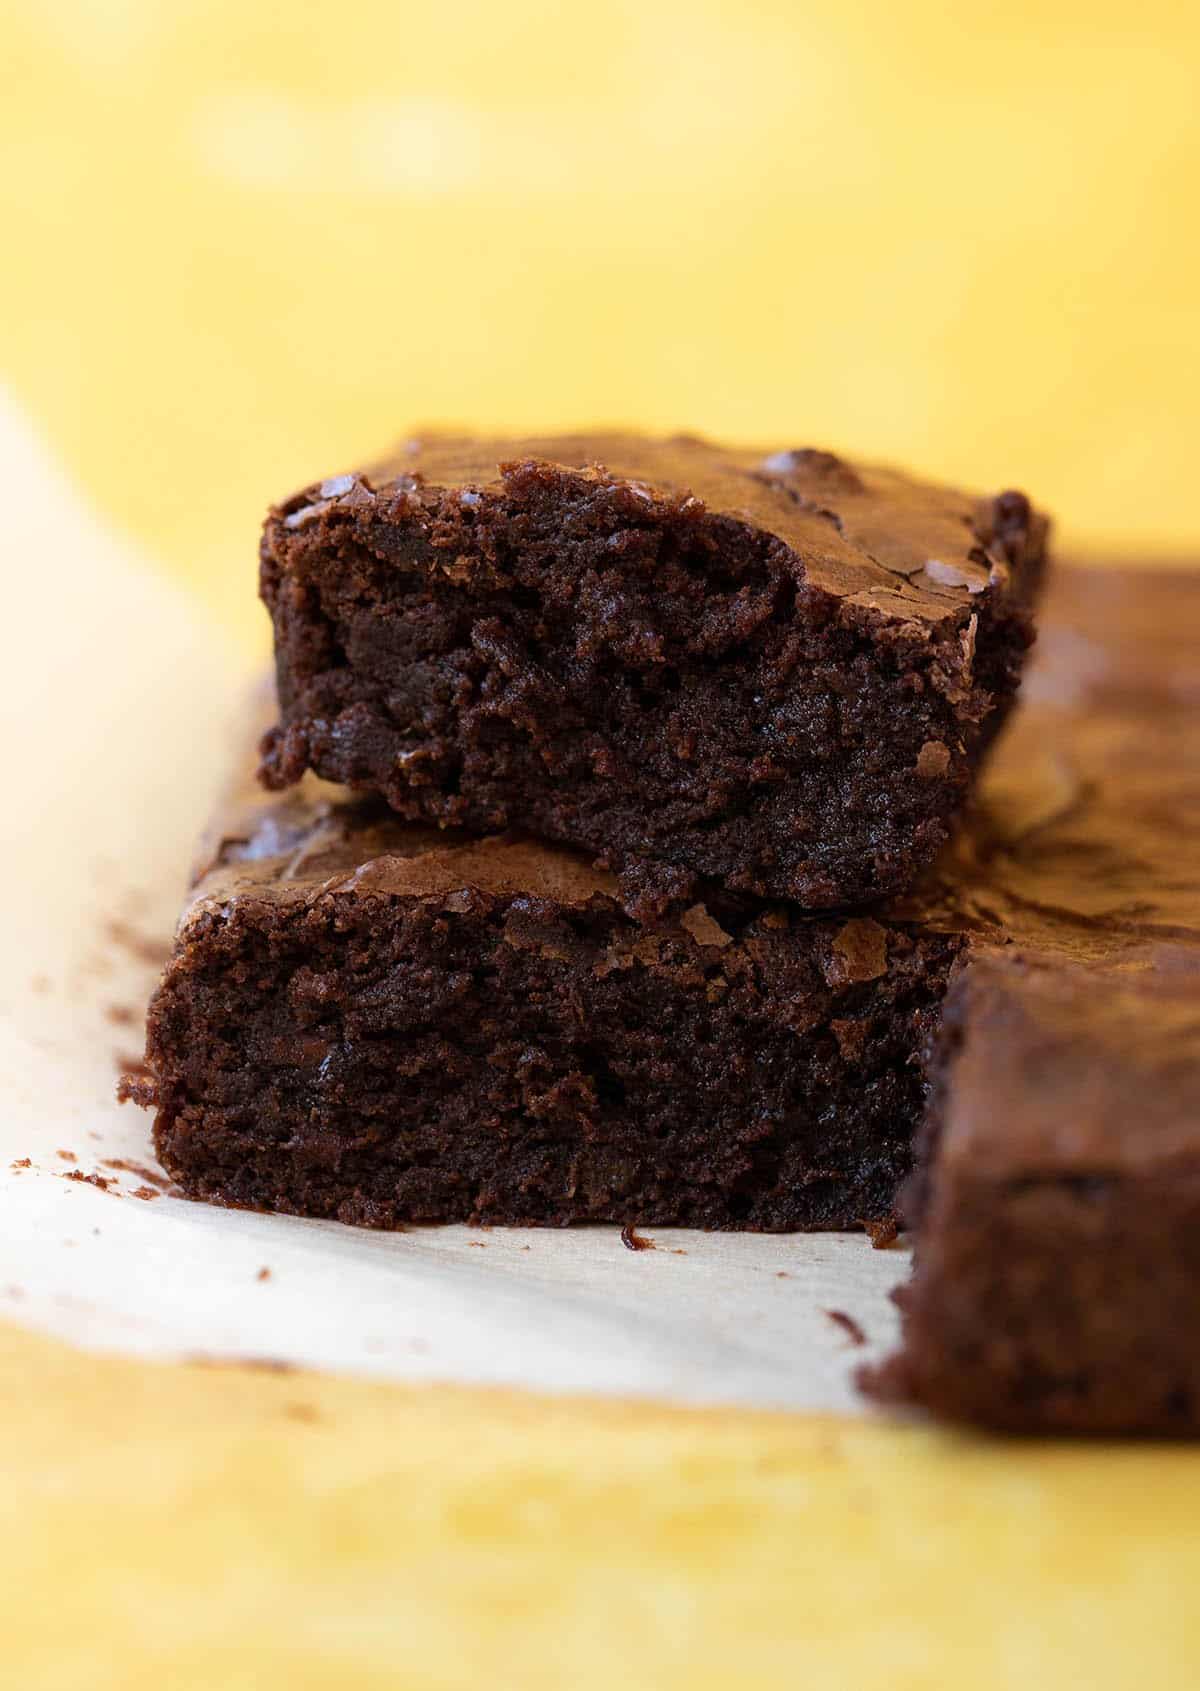 A slice of Chocolate Orange Brownies showing a fudgy middle.